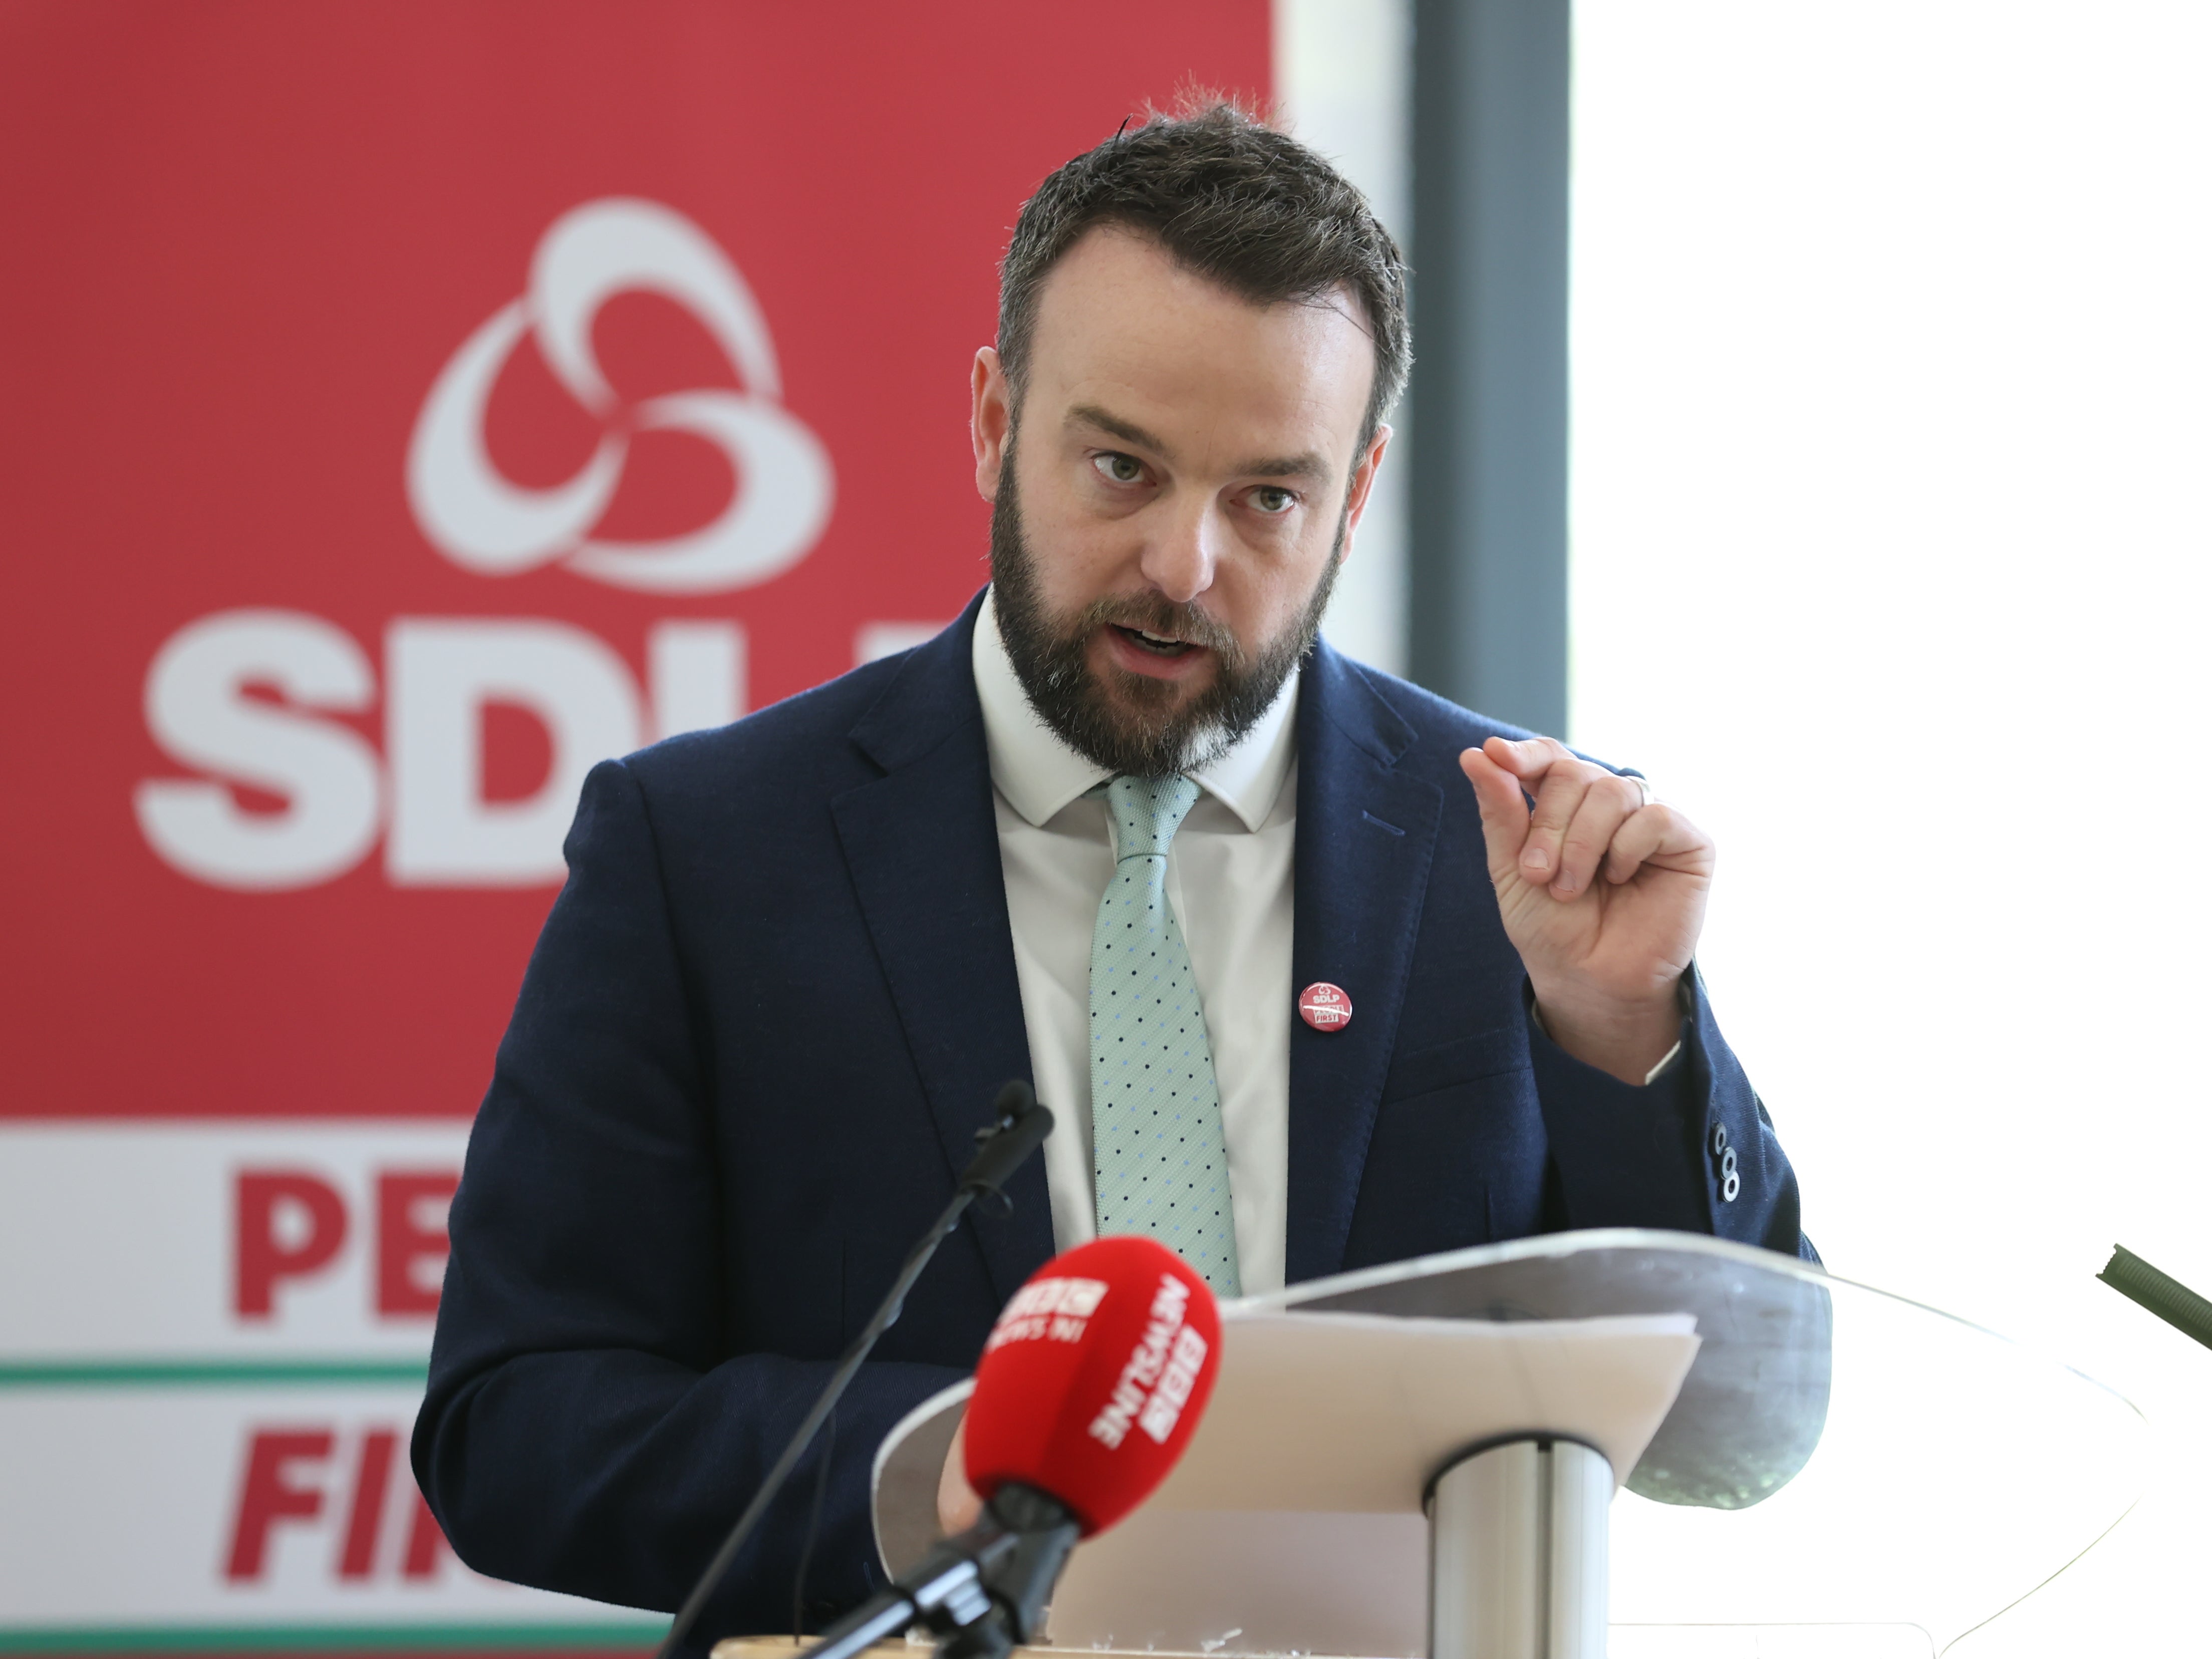 SDLP leader Colum Eastwood at the SDLP manifesto launch at The Junction, Dungannon. Picture date: Tuesday April 26, 2022 (Liam McBurney/PA)